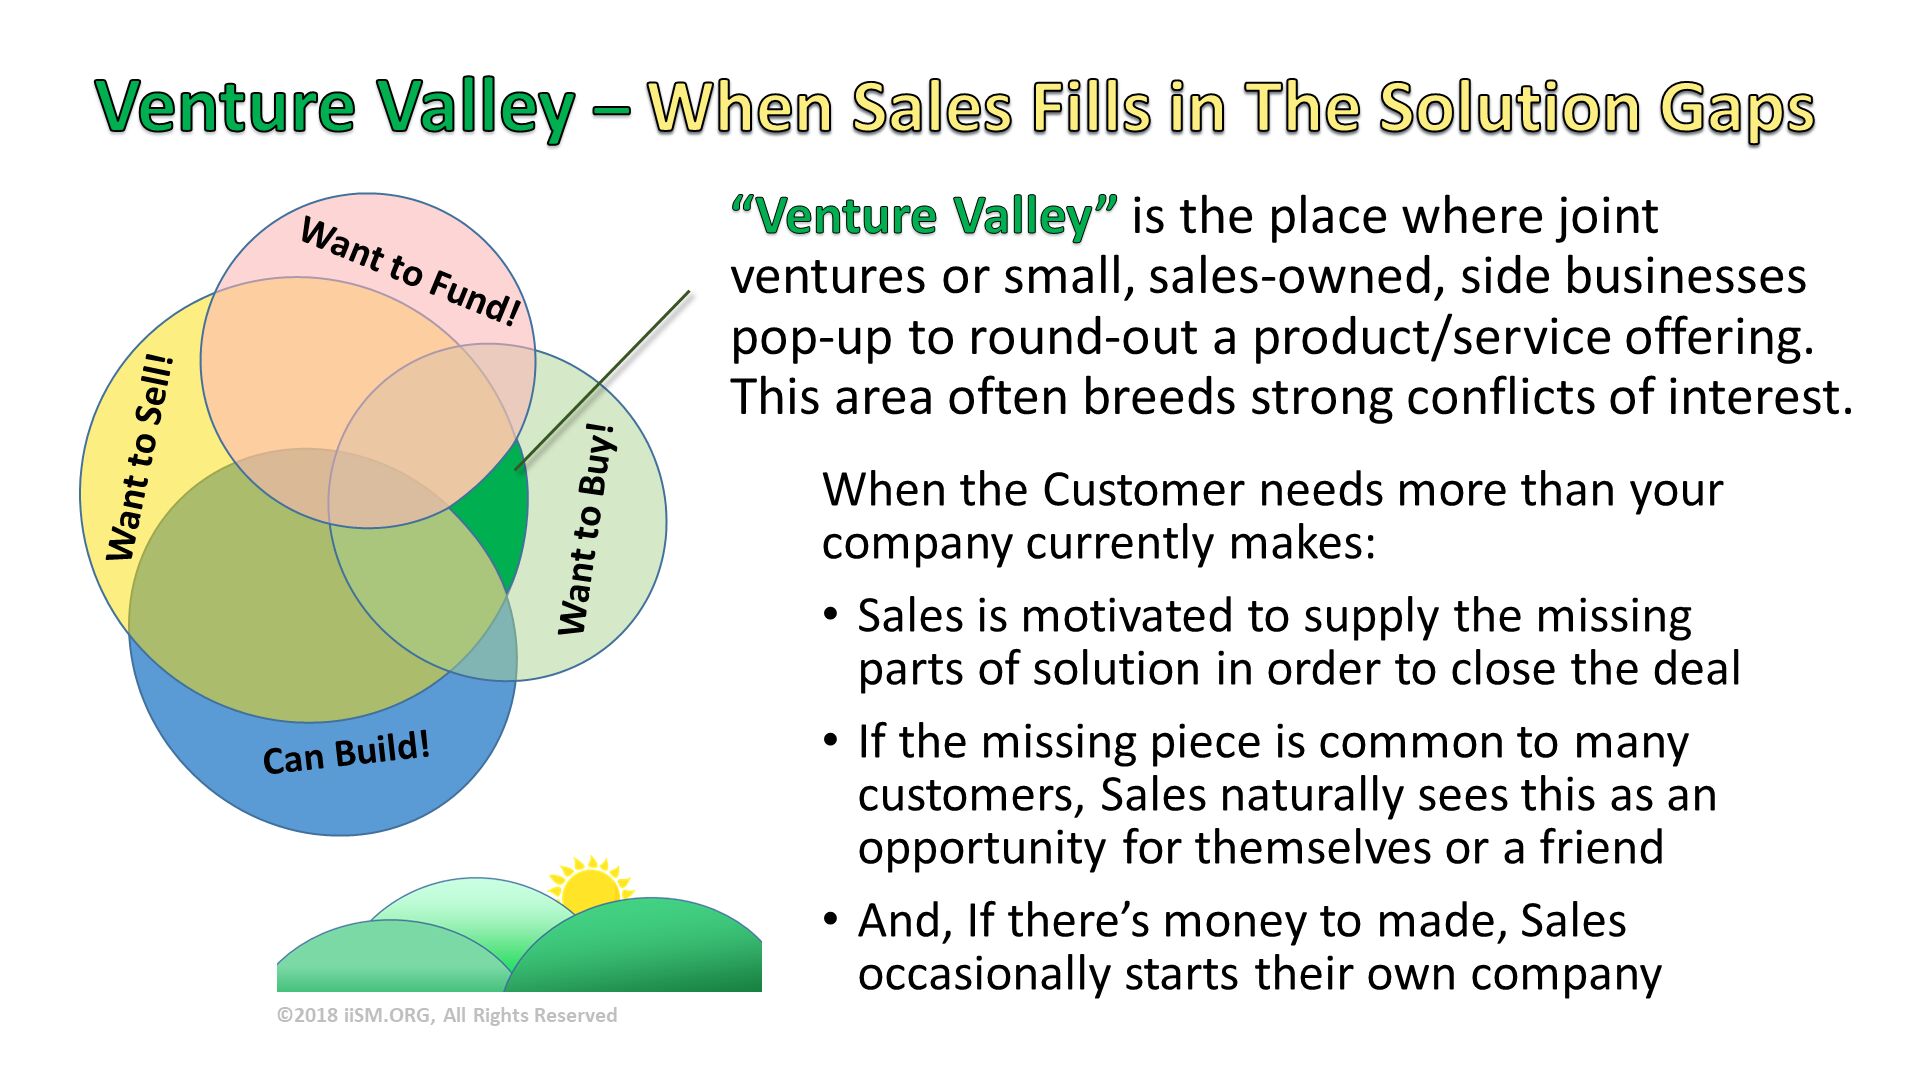 Venture Valley – When Sales Fills in The Solution Gaps. “Venture Valley” is the place where joint ventures or small, sales-owned, side businessespop-up to round-out a product/service offering.This area often breeds strong conflicts of interest. When the Customer needs more than your company currently makes:
Sales is motivated to supply the missing parts of solution in order to close the deal
If the missing piece is common to many customers, Sales naturally sees this as an opportunity for themselves or a friend
And, If there’s money to made, Sales occasionally starts their own company. ©2018 iiSM.ORG, All Rights Reserved. 